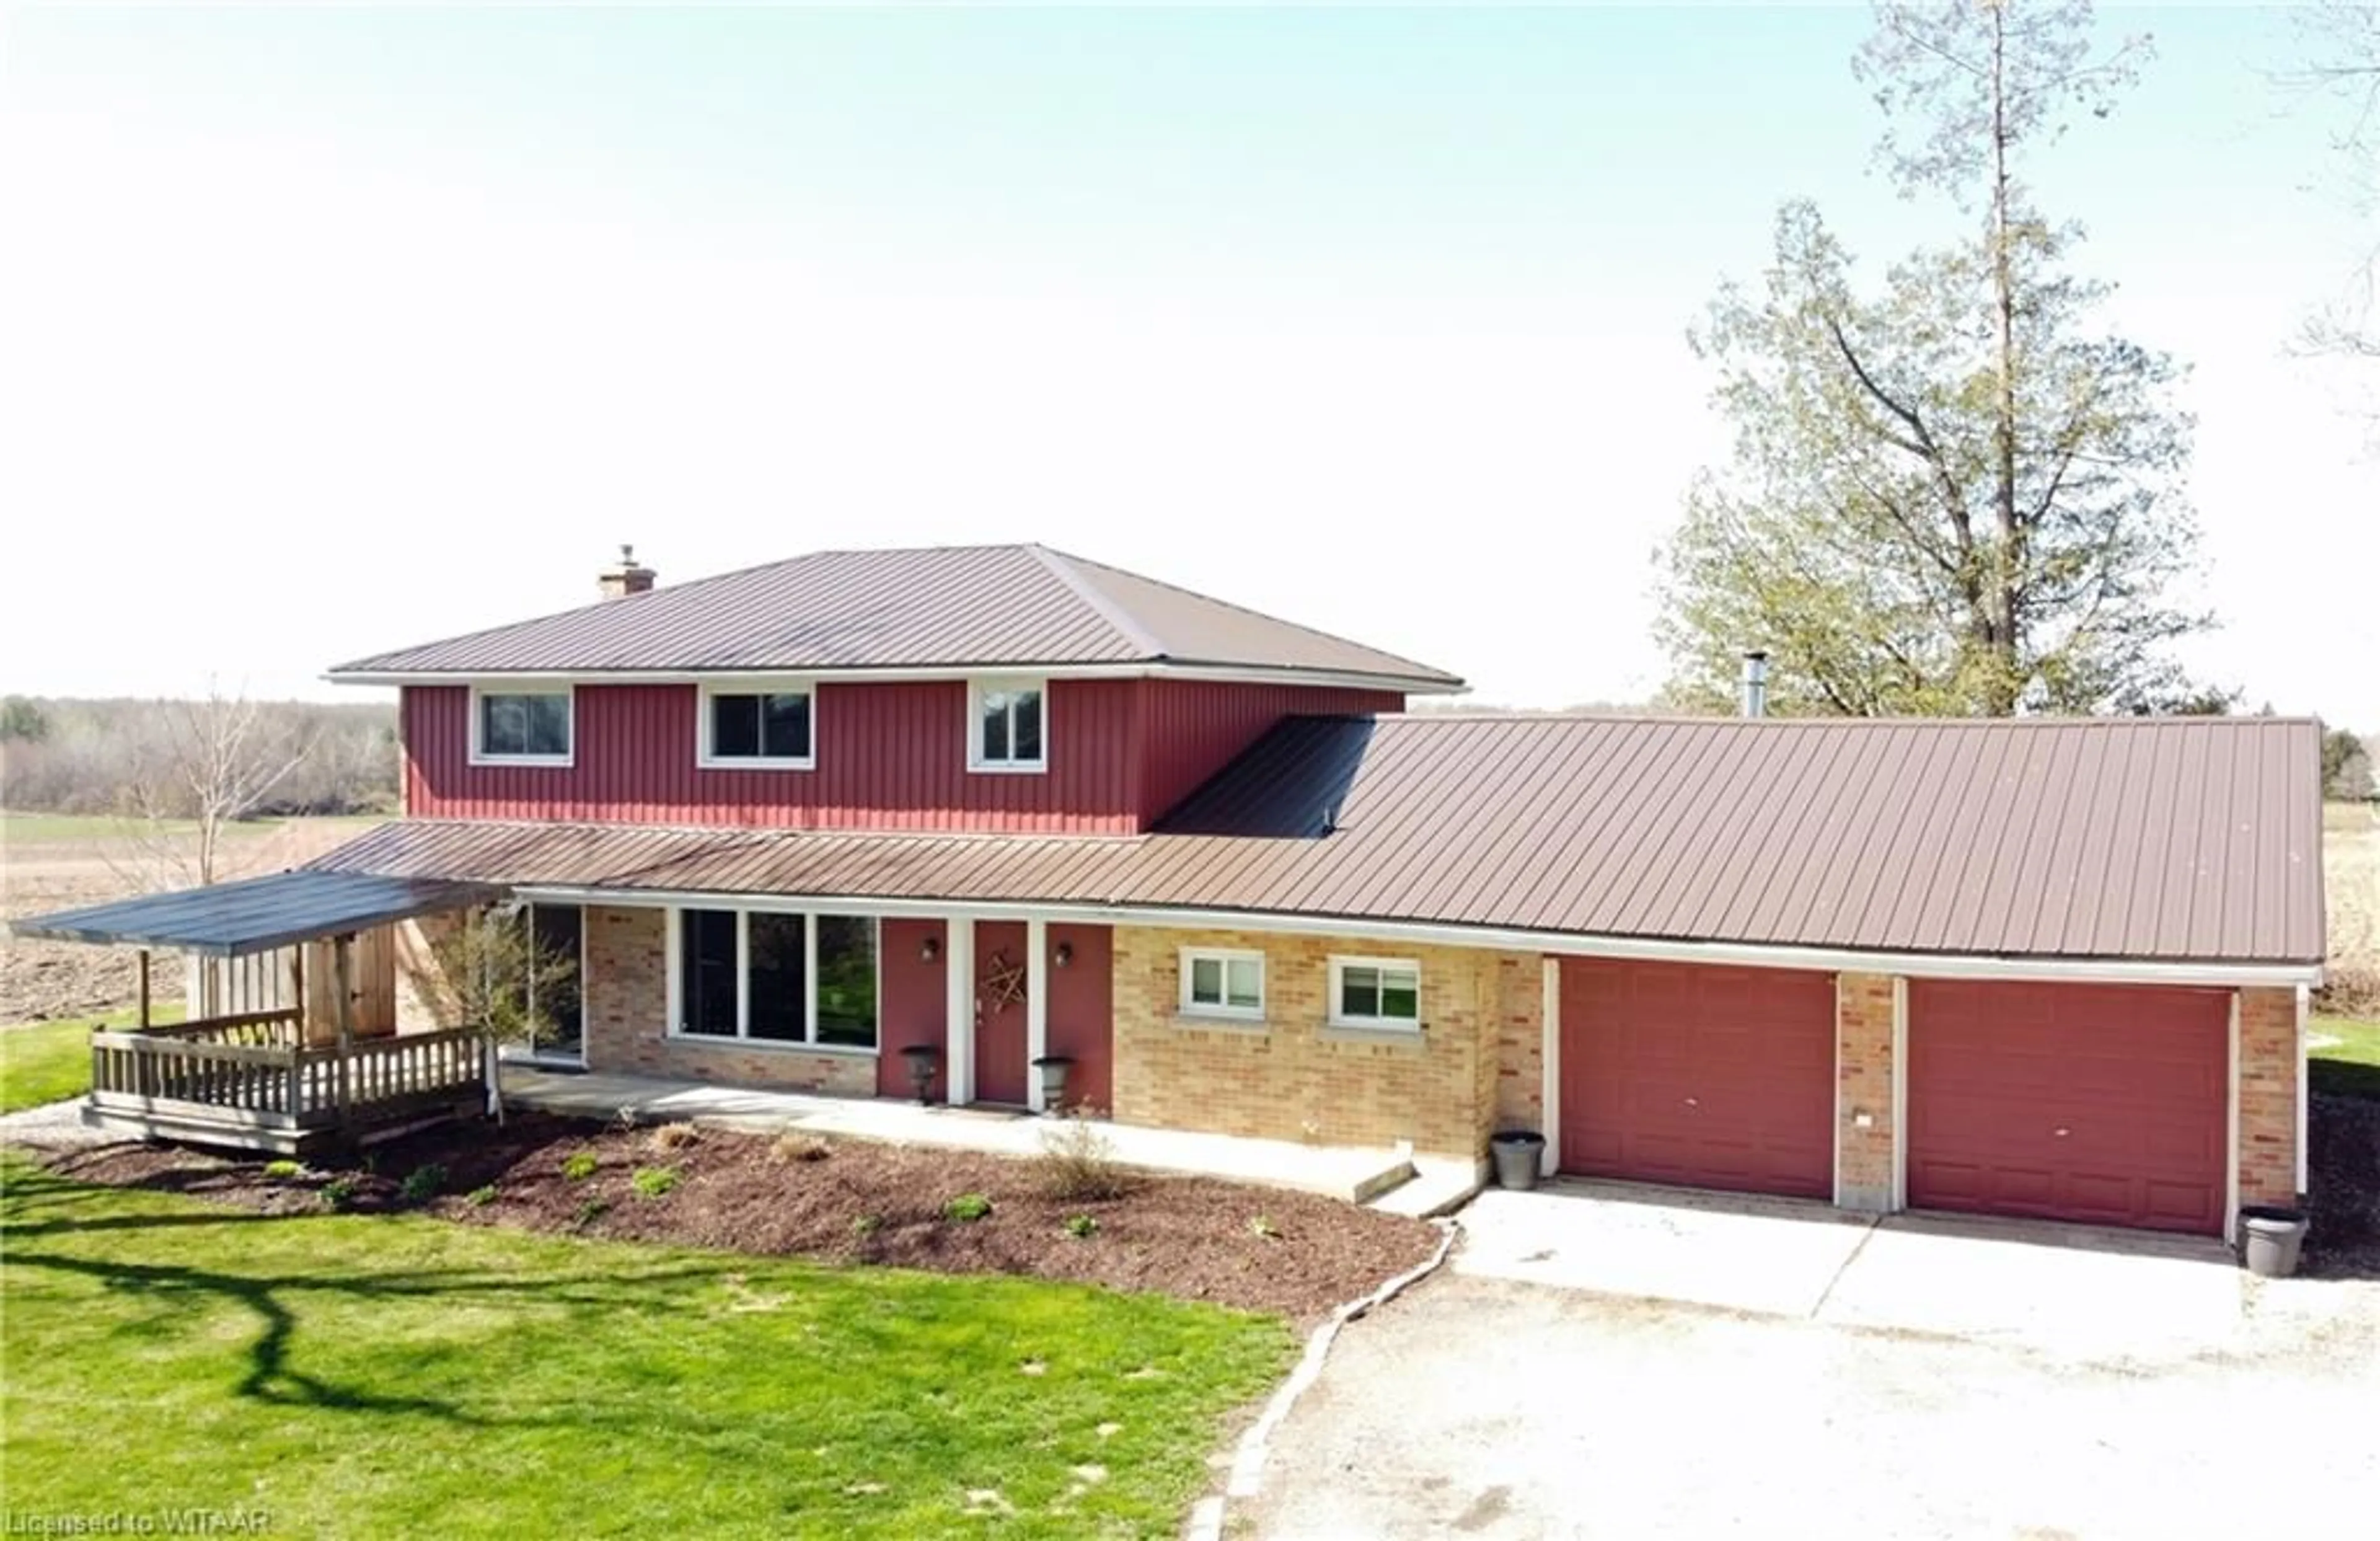 Home with brick exterior material for 744410 Road 74, Woodstock Ontario N0J 1J0